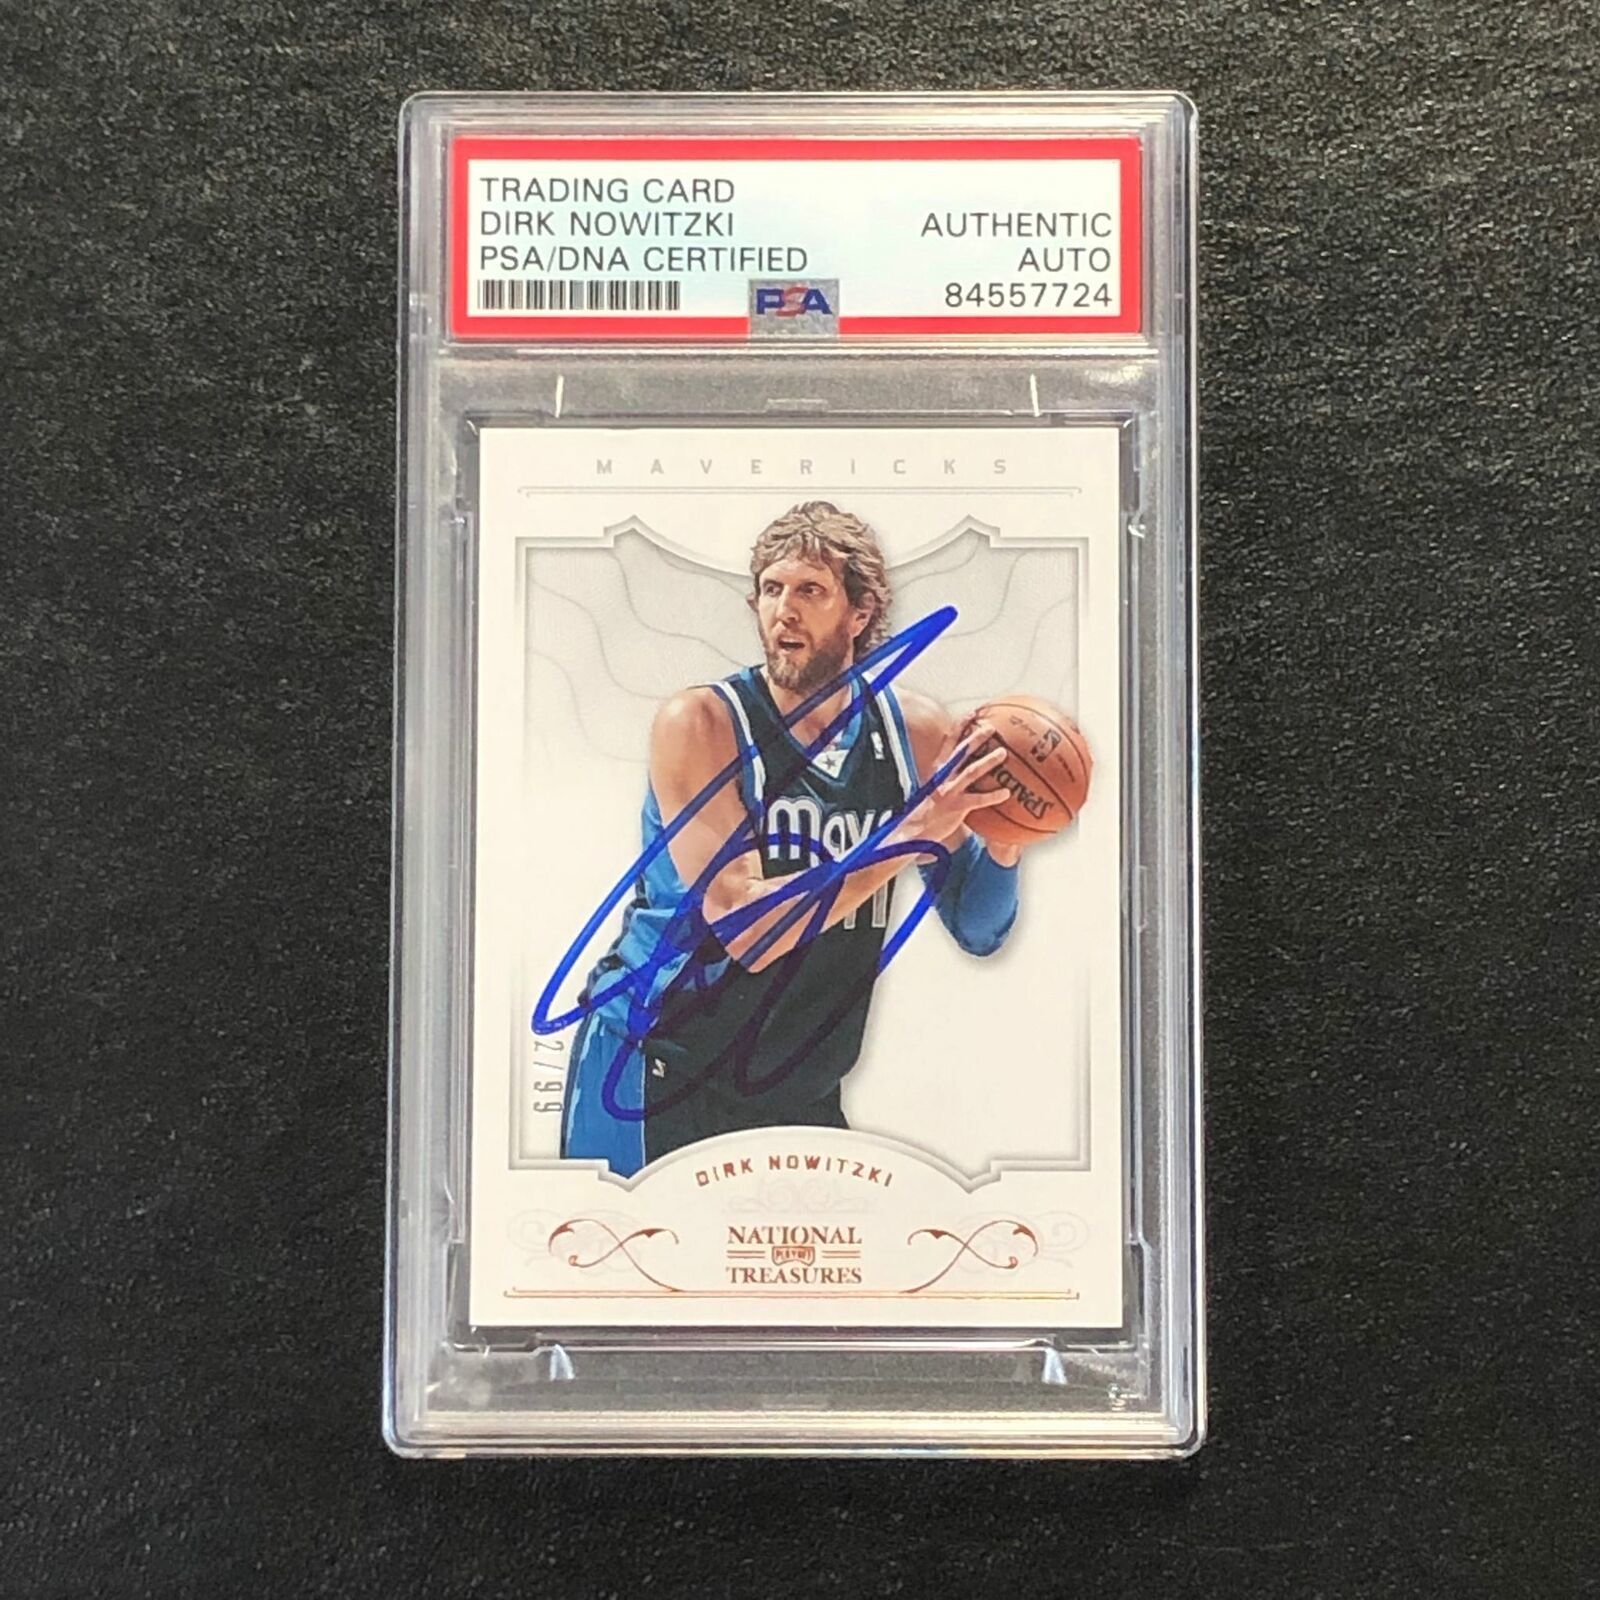 Primary image for 2012-13 National Treasures #17 Dirk Nowitzki Signed Card AUTO PSA/DNA Slabbed Ma